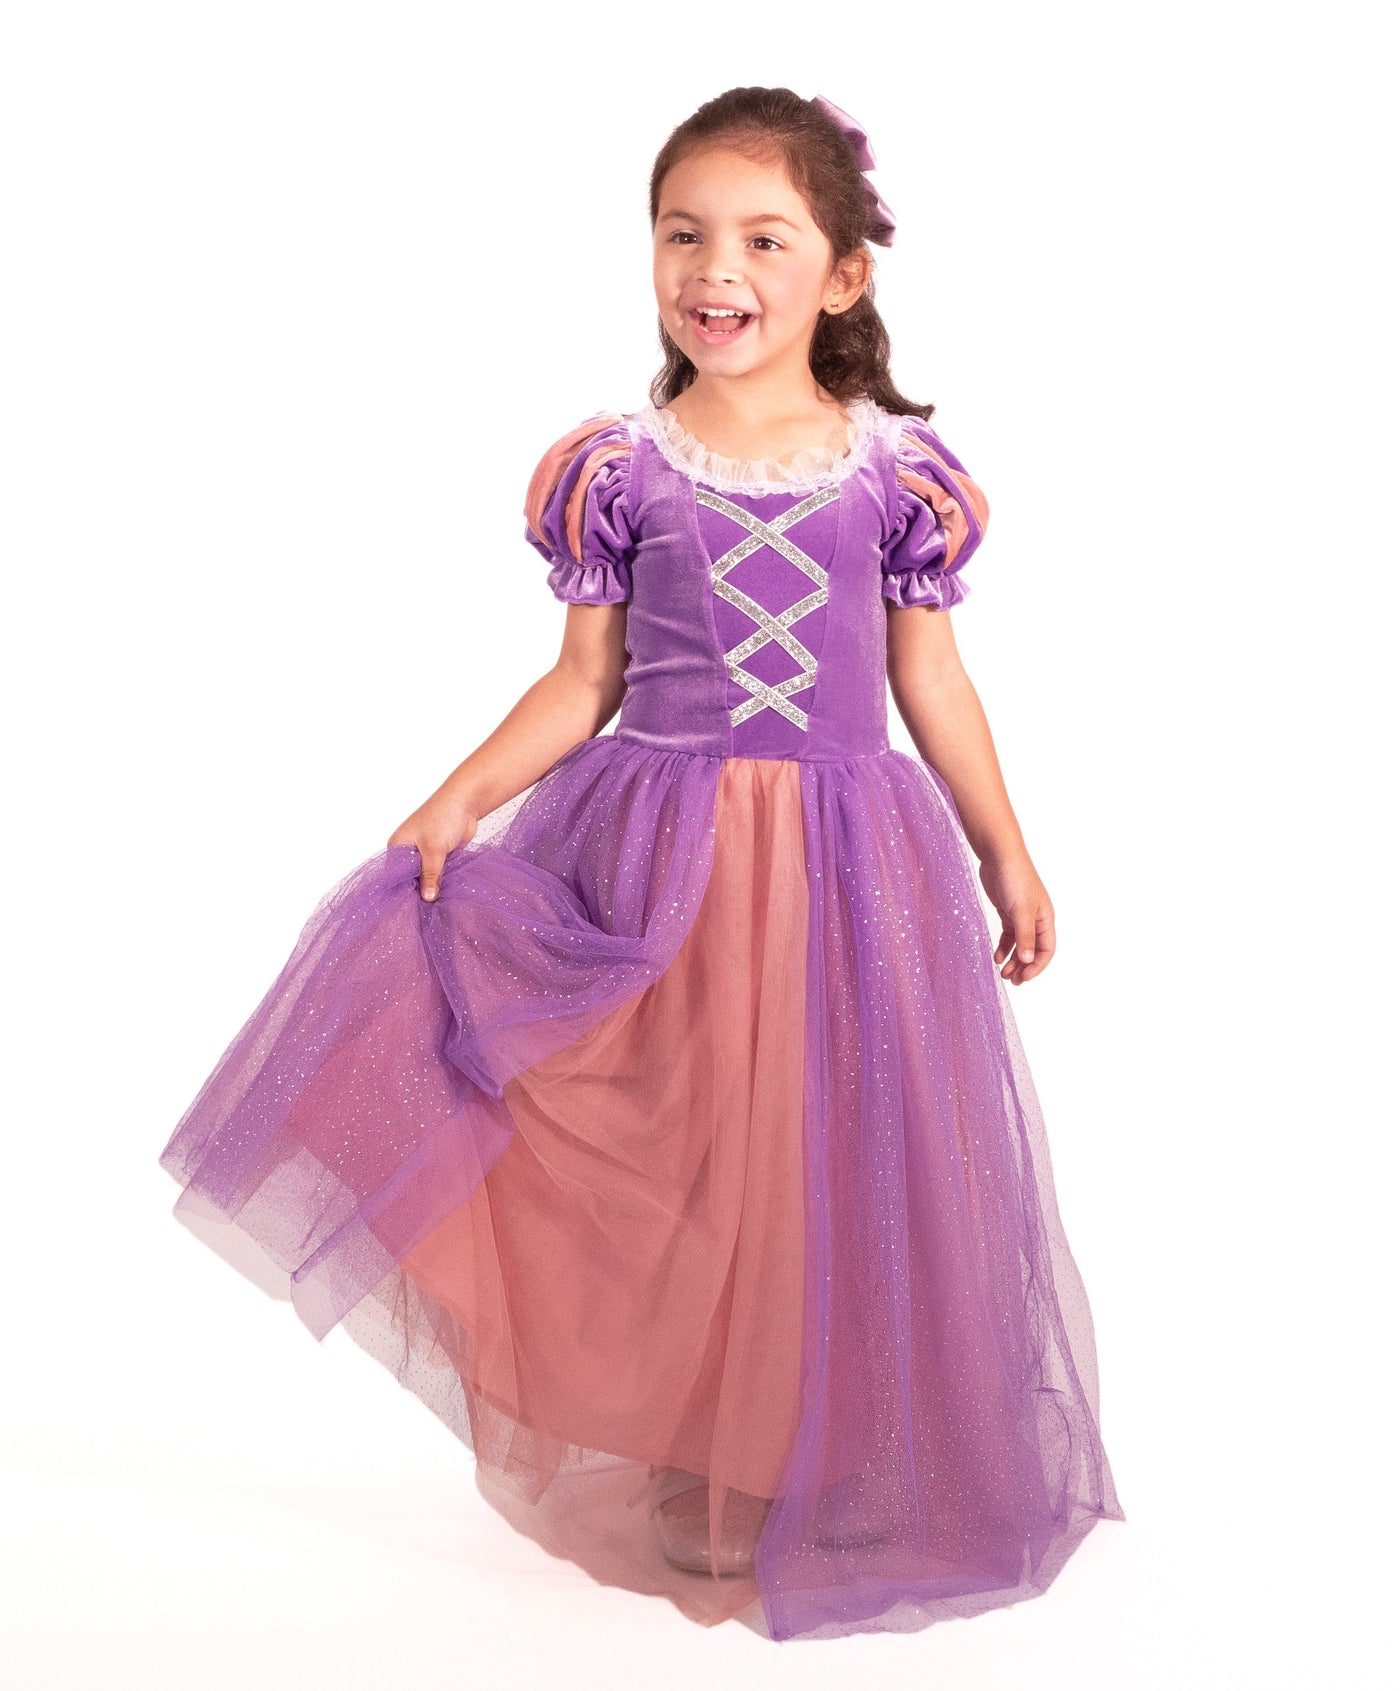 Joy Costume: The Tower Princess SHIPS SEPARATELY